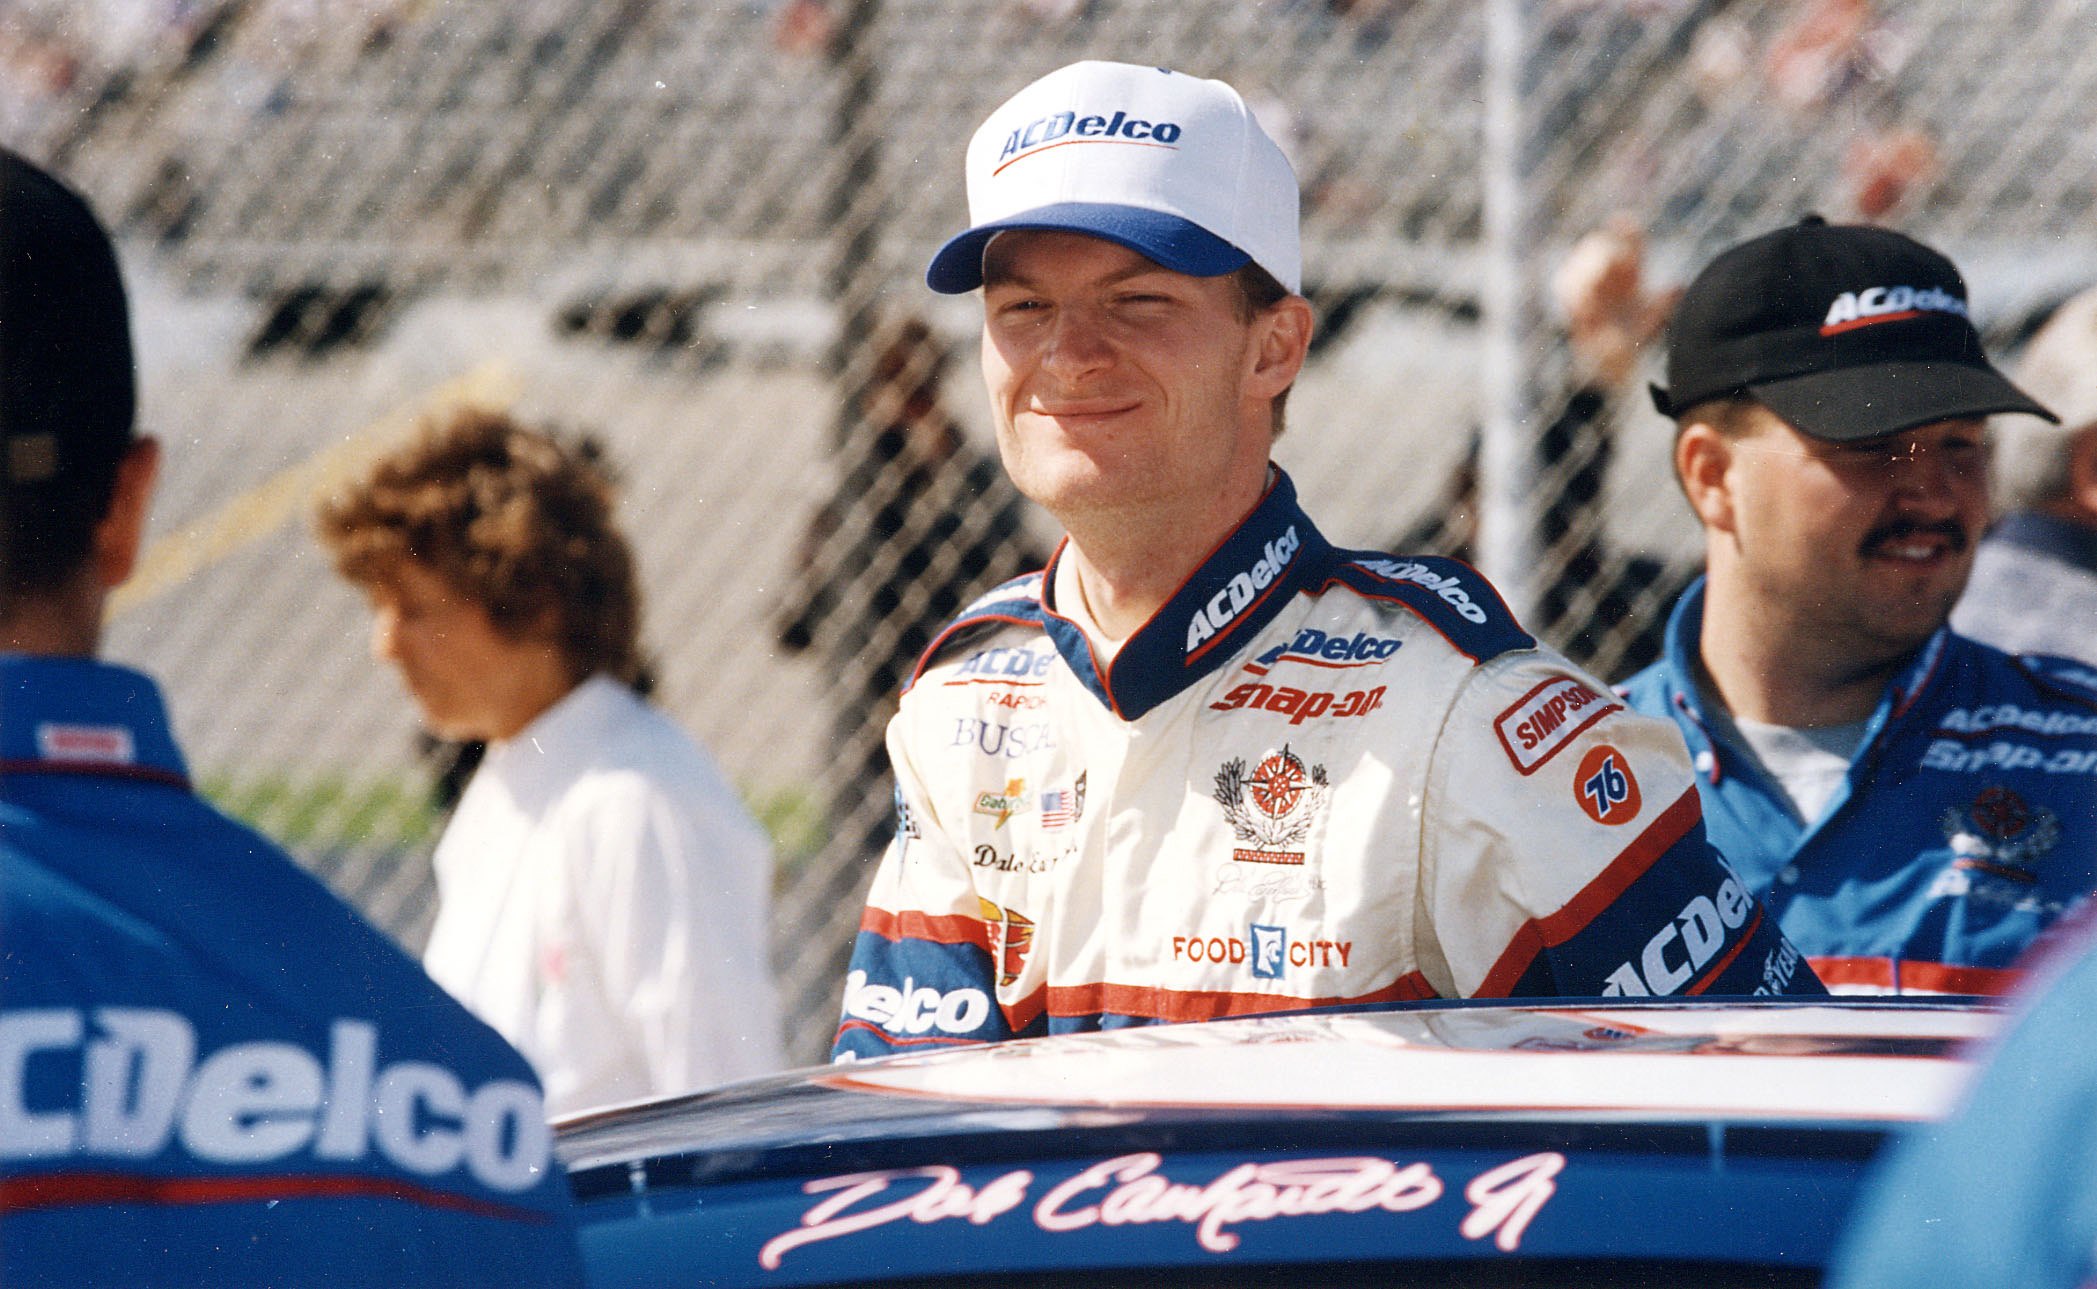 1998: Dale Earnhardt, Jr. readies himself for another race in the 1998 NASCAR Busch Series. Junior